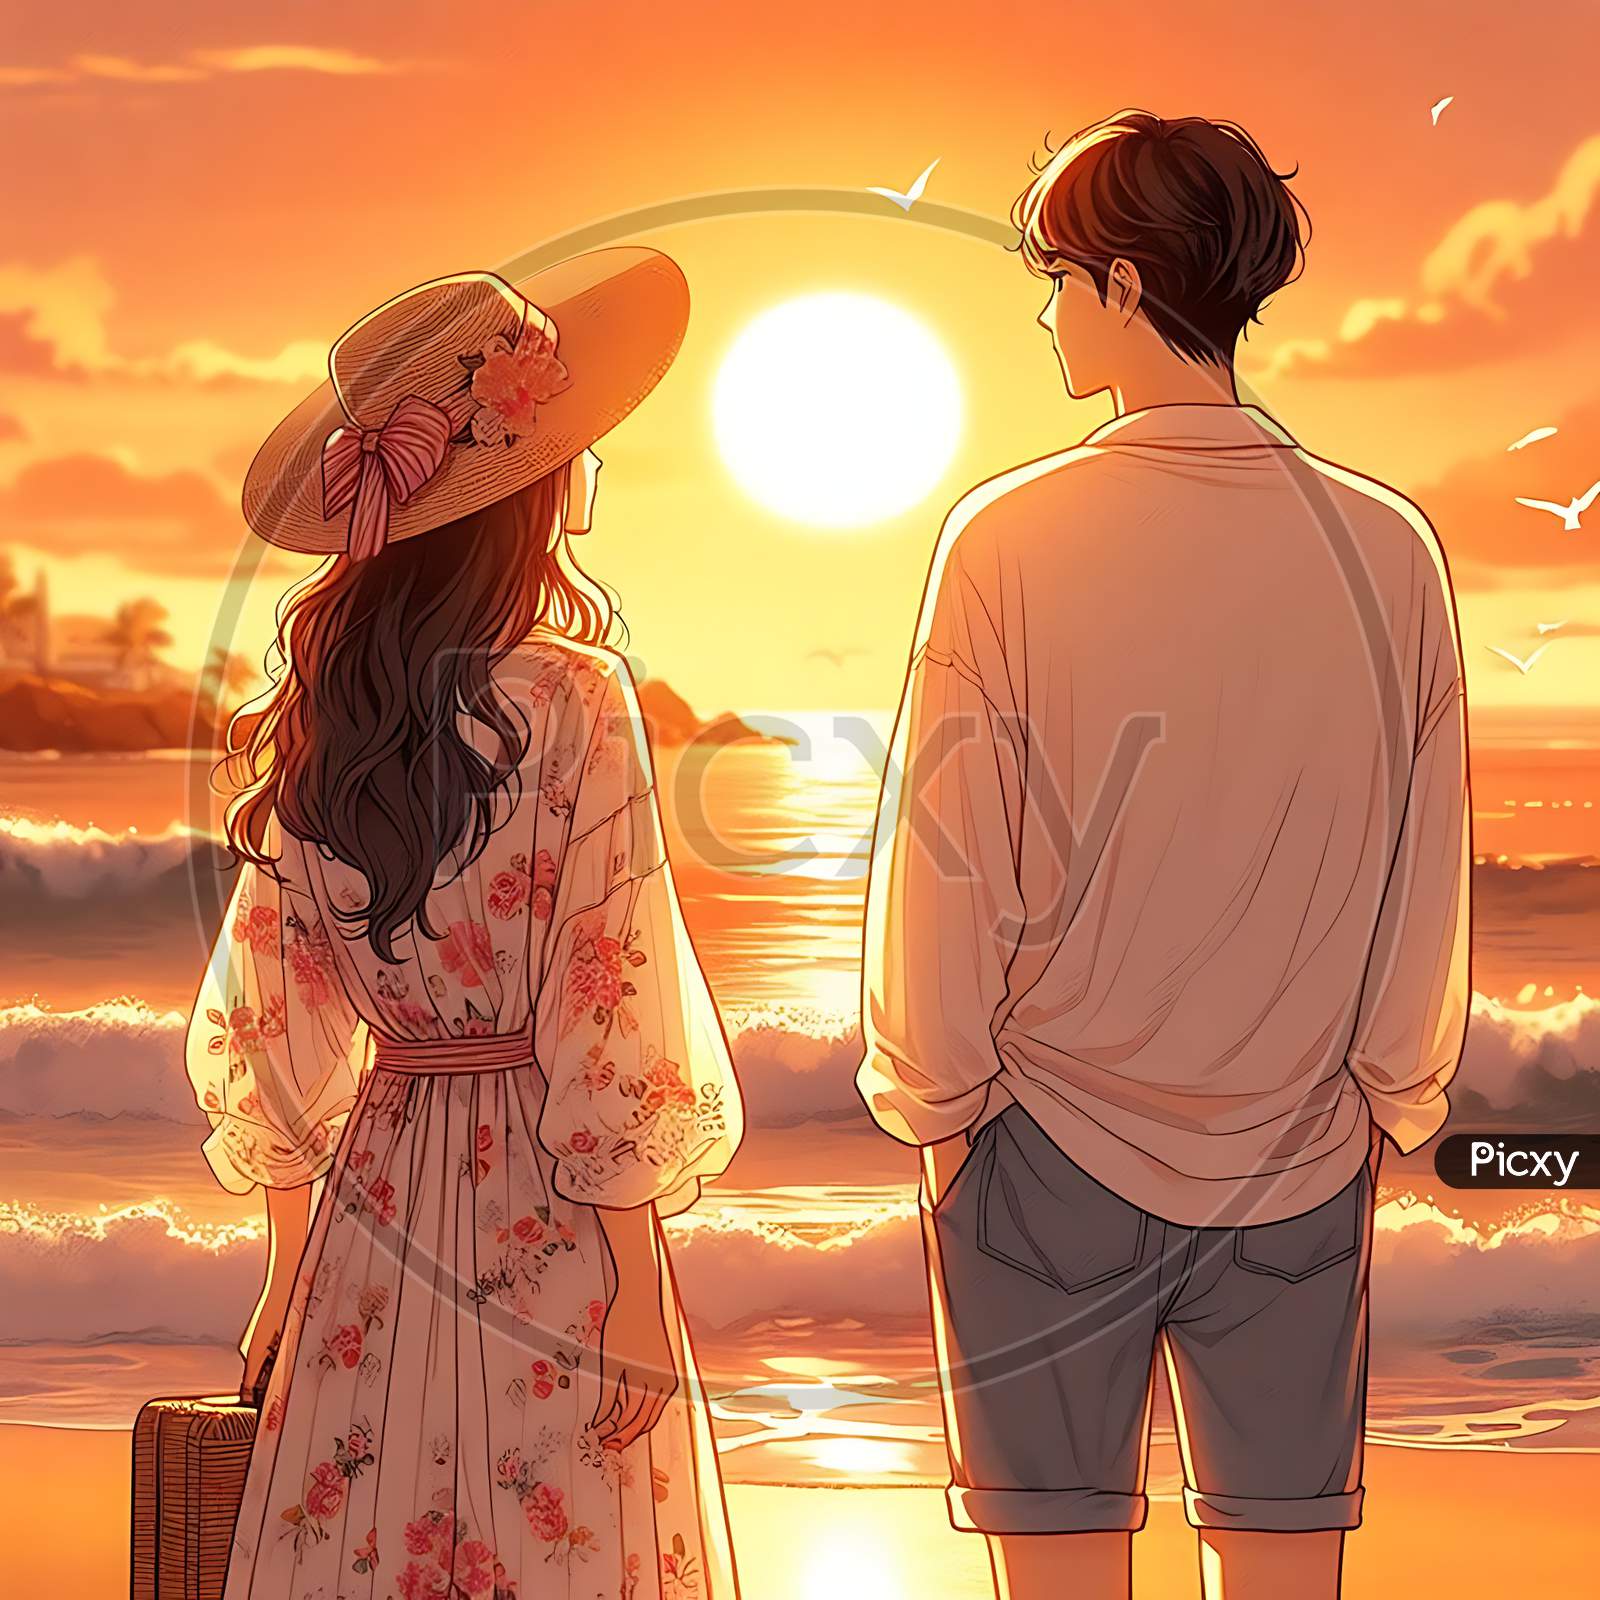 A romantic couple at the beach seeing a beautiful sunset view